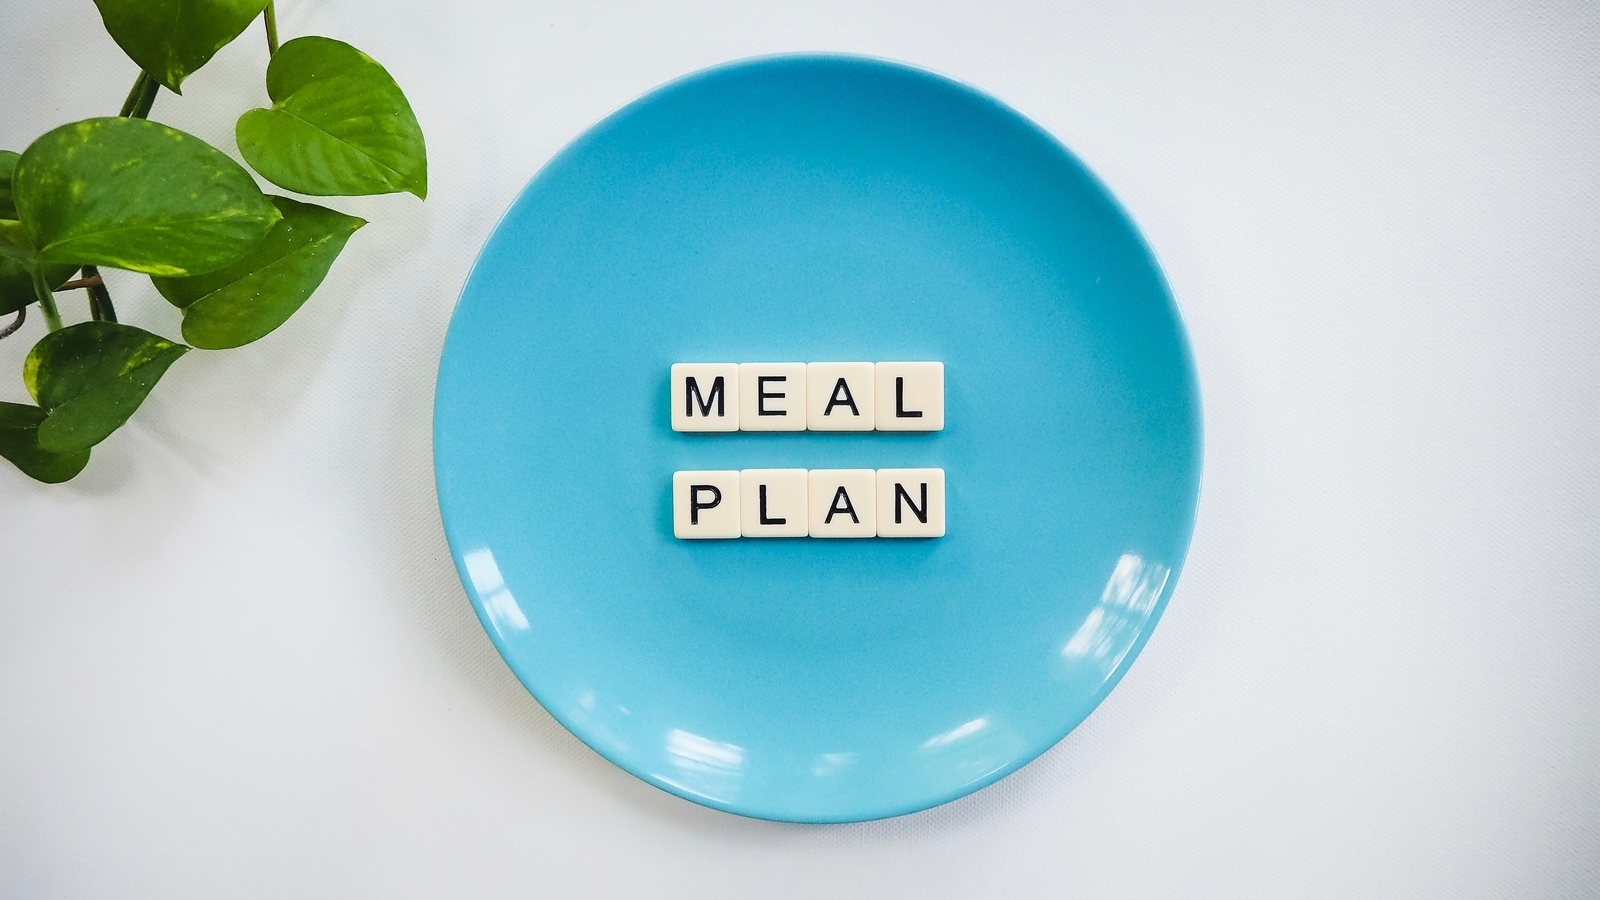 Intermittent fasting, keto or high protein, which diet plan will work for you? | Health